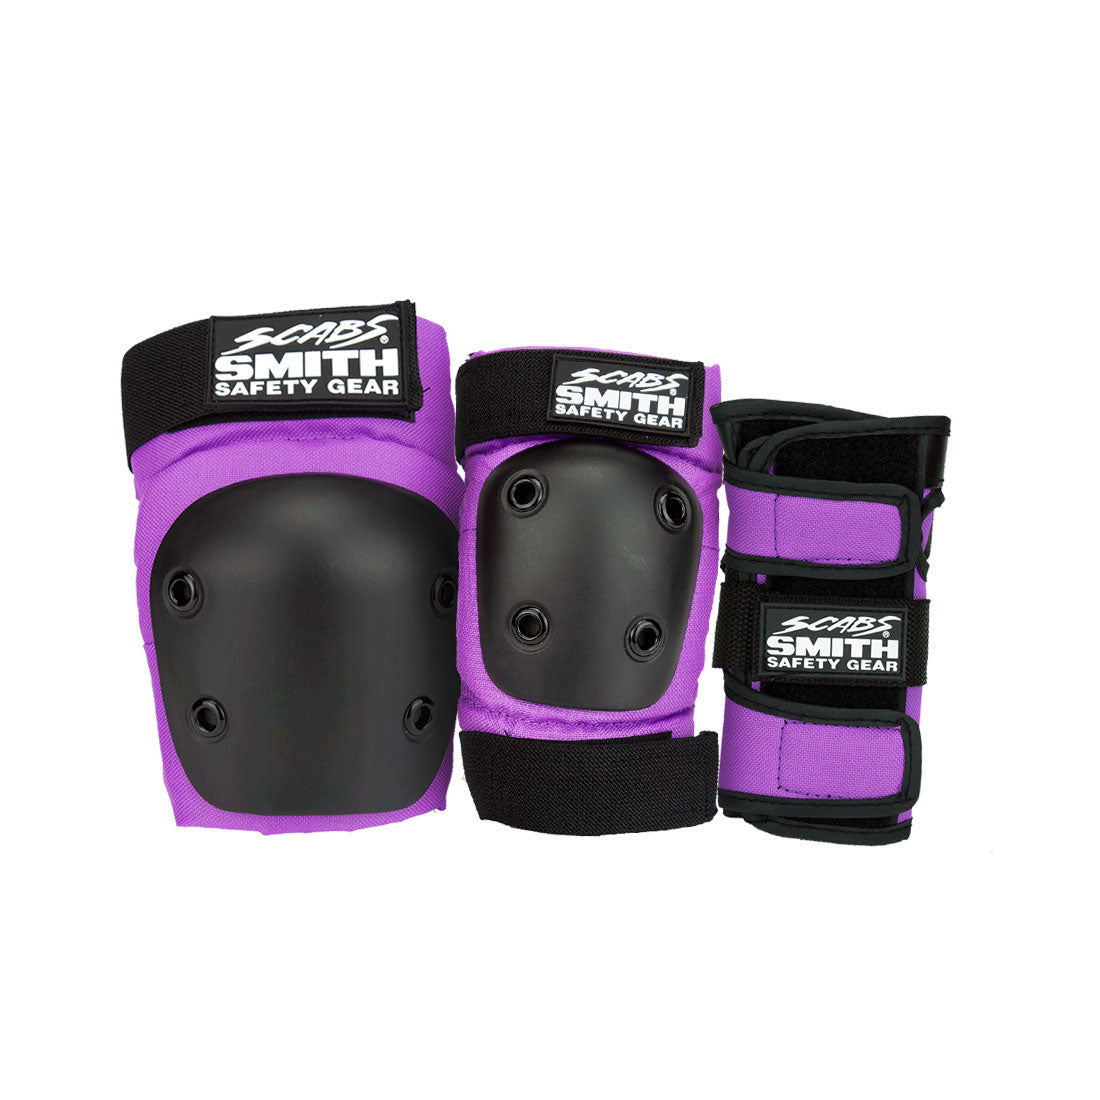 Smith Scabs Youth Tri Pack - Purple Protective Gear